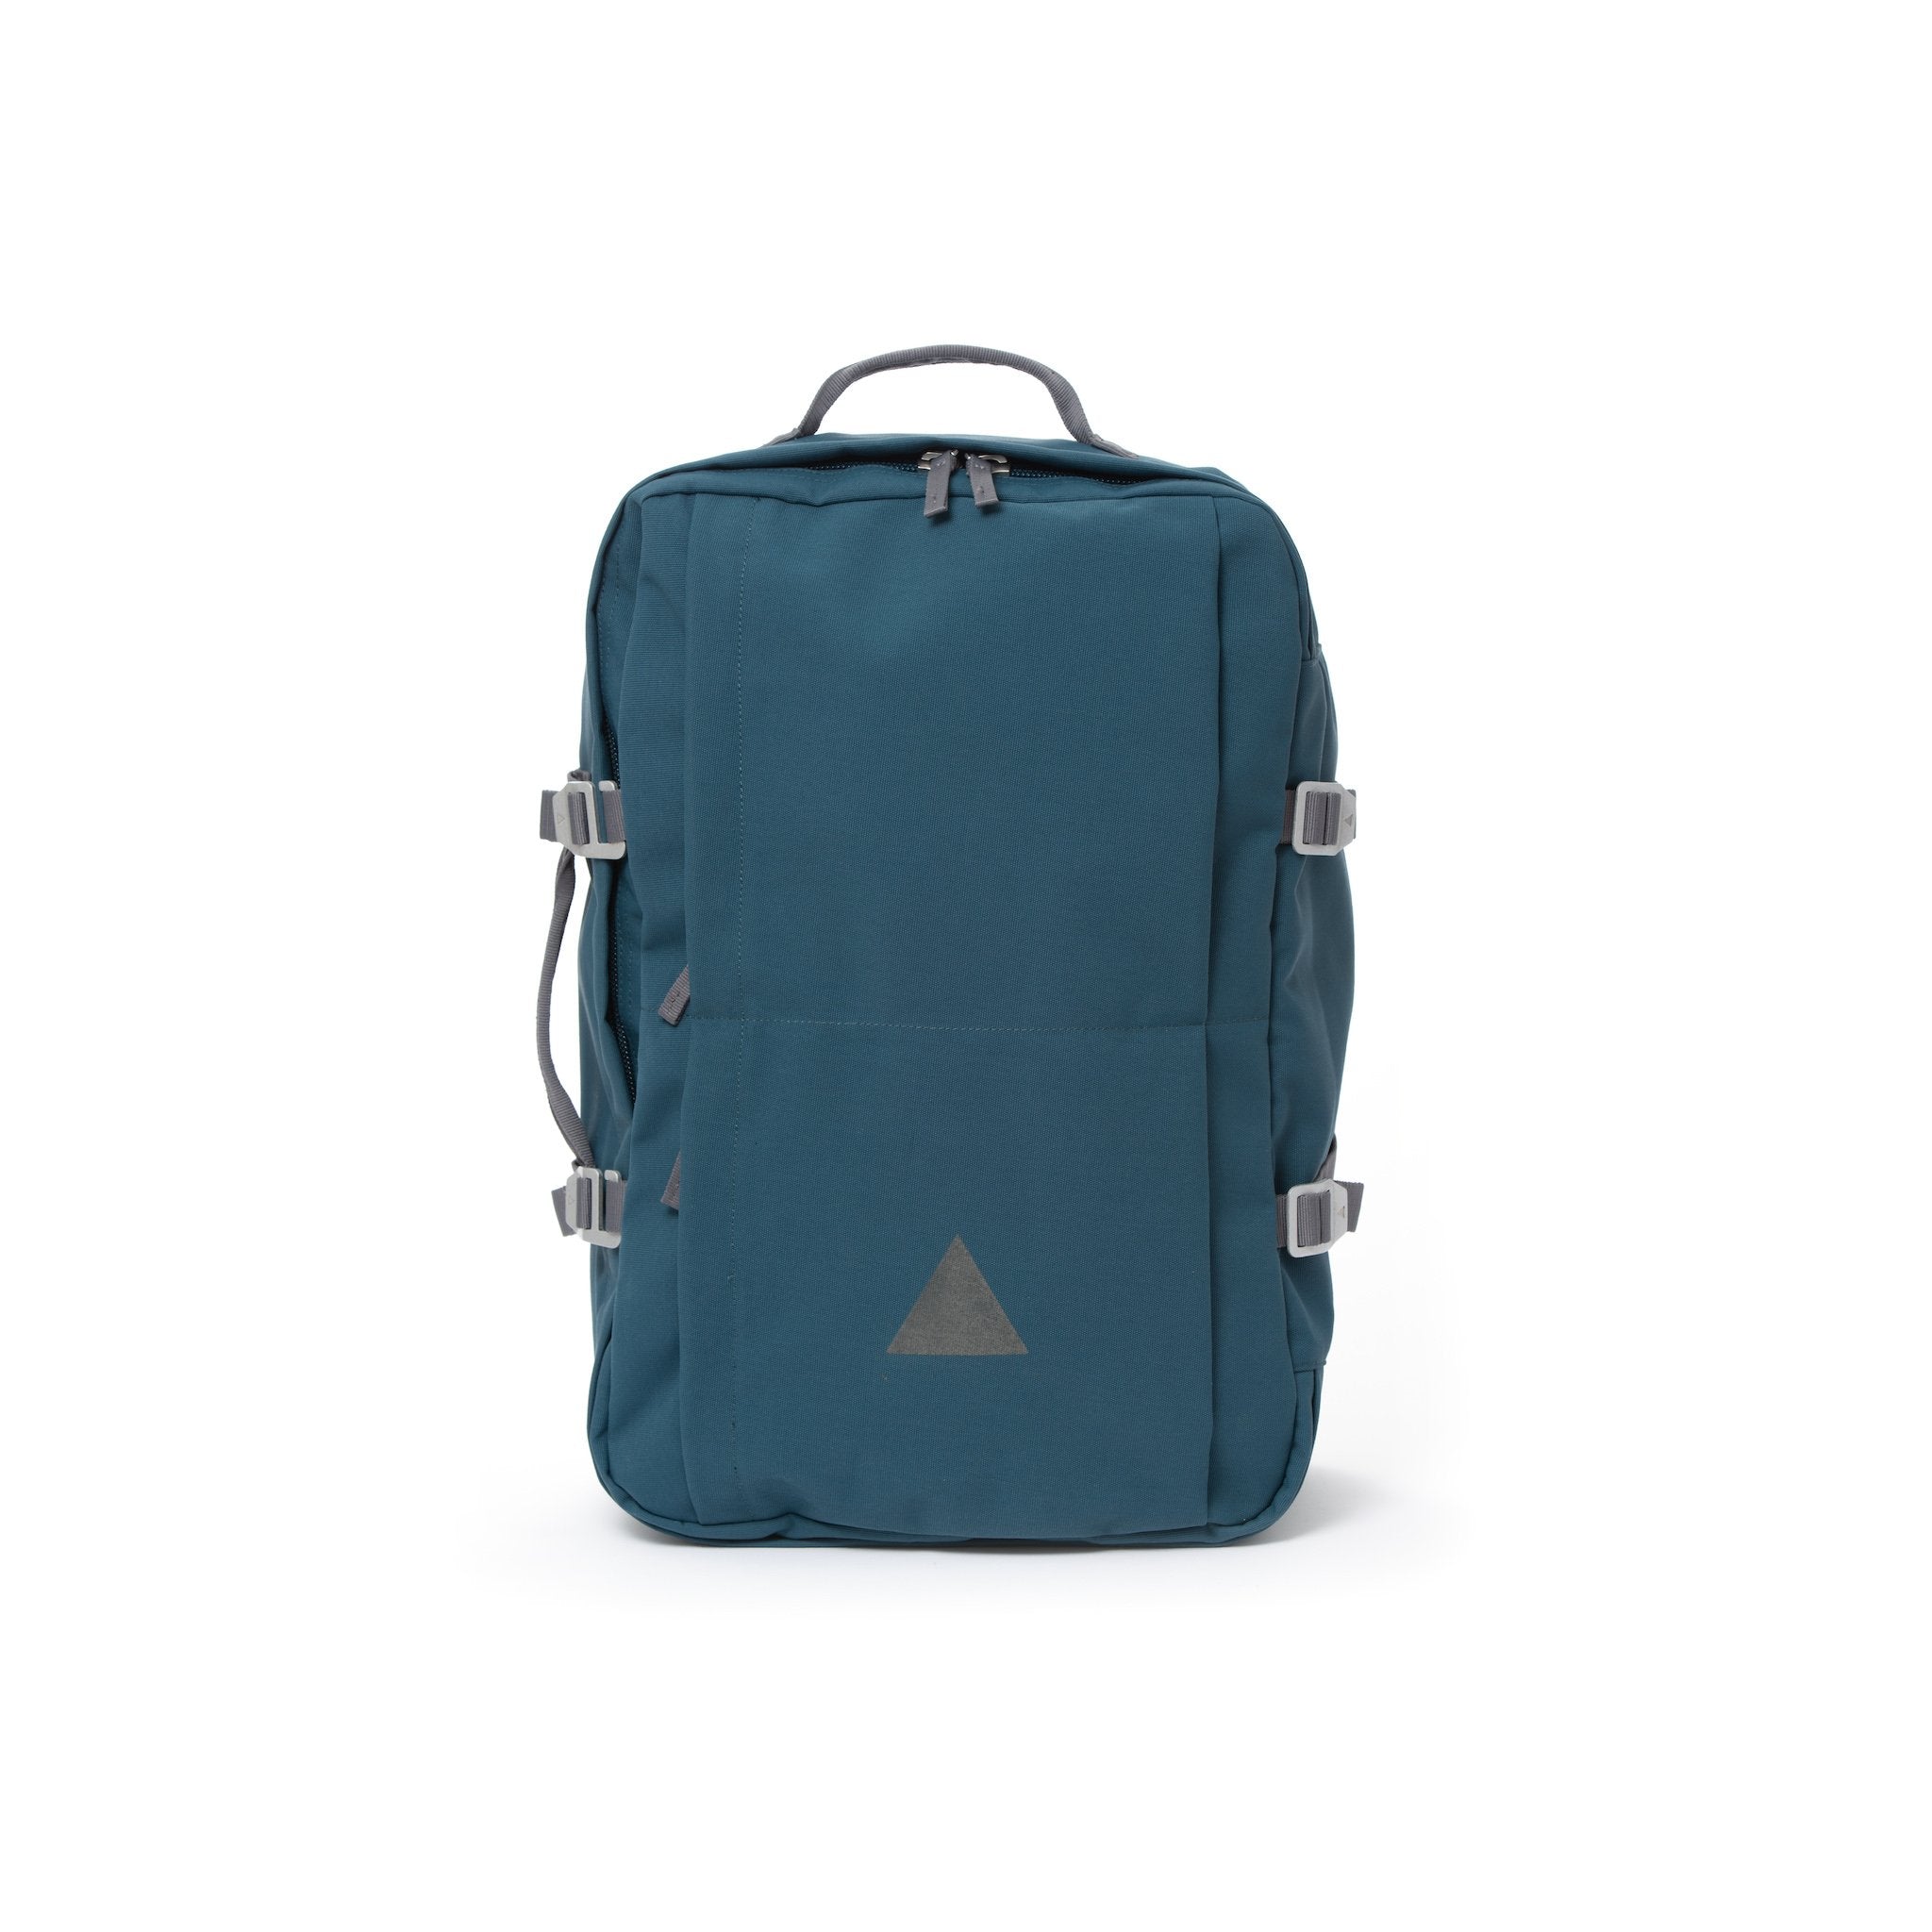 Blue recycled canvas travel backpack.